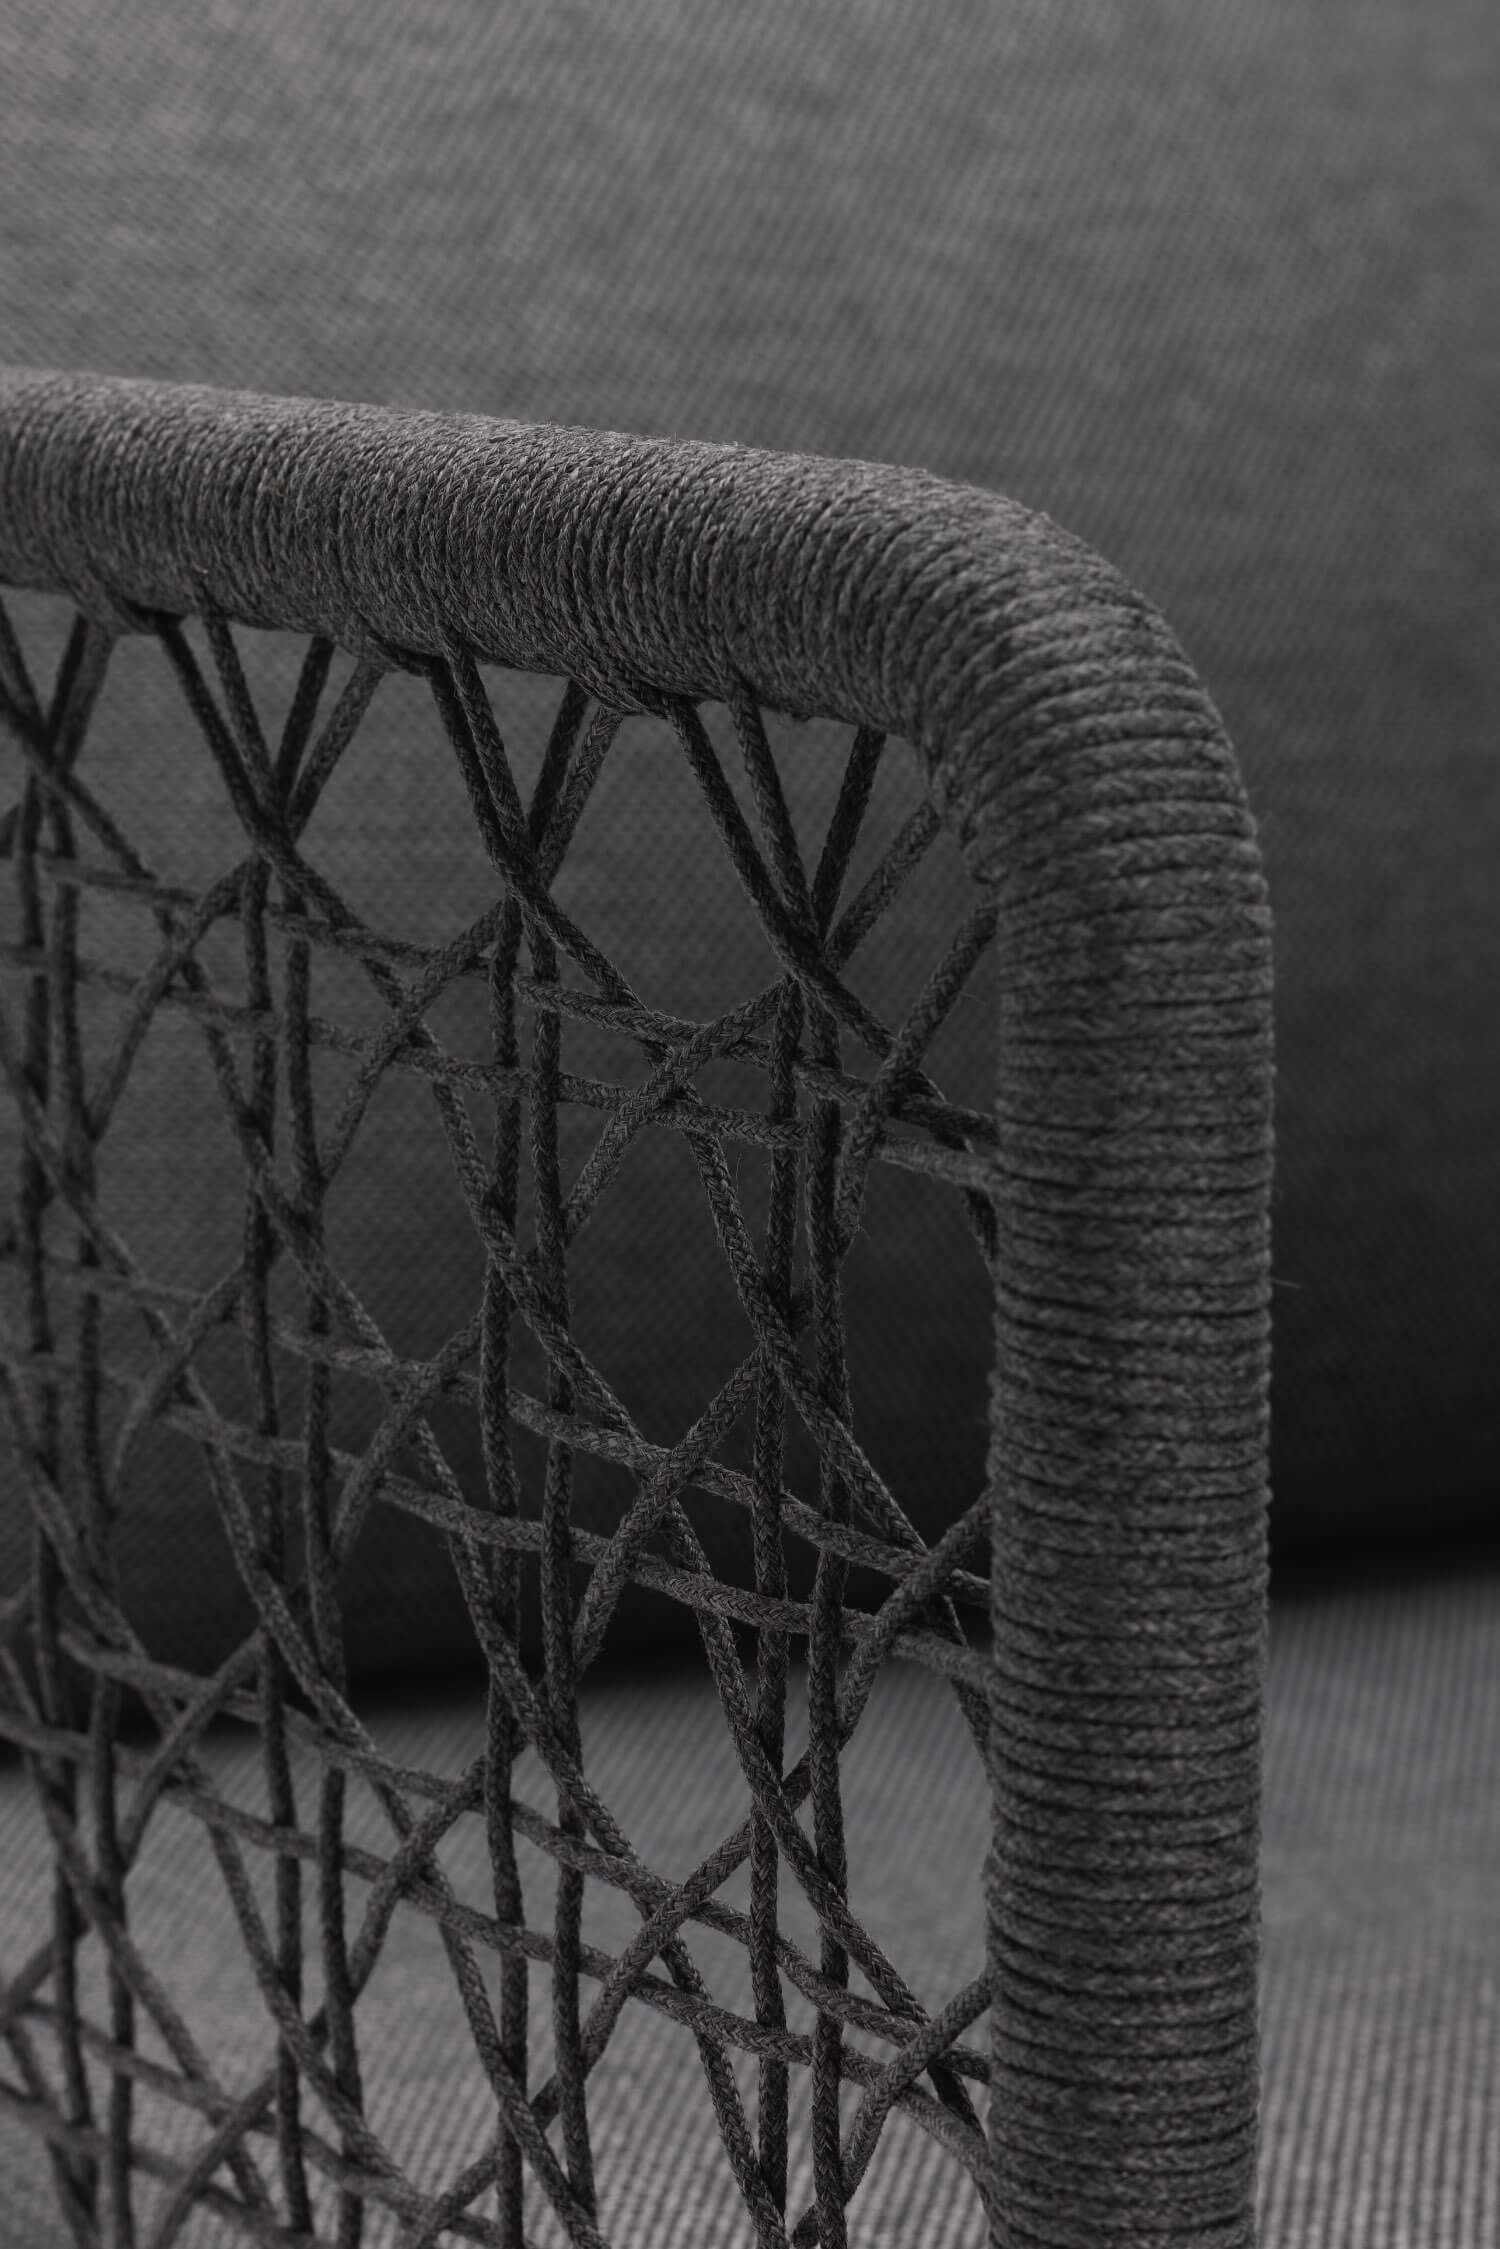 Aireys Woven Lounge Chair